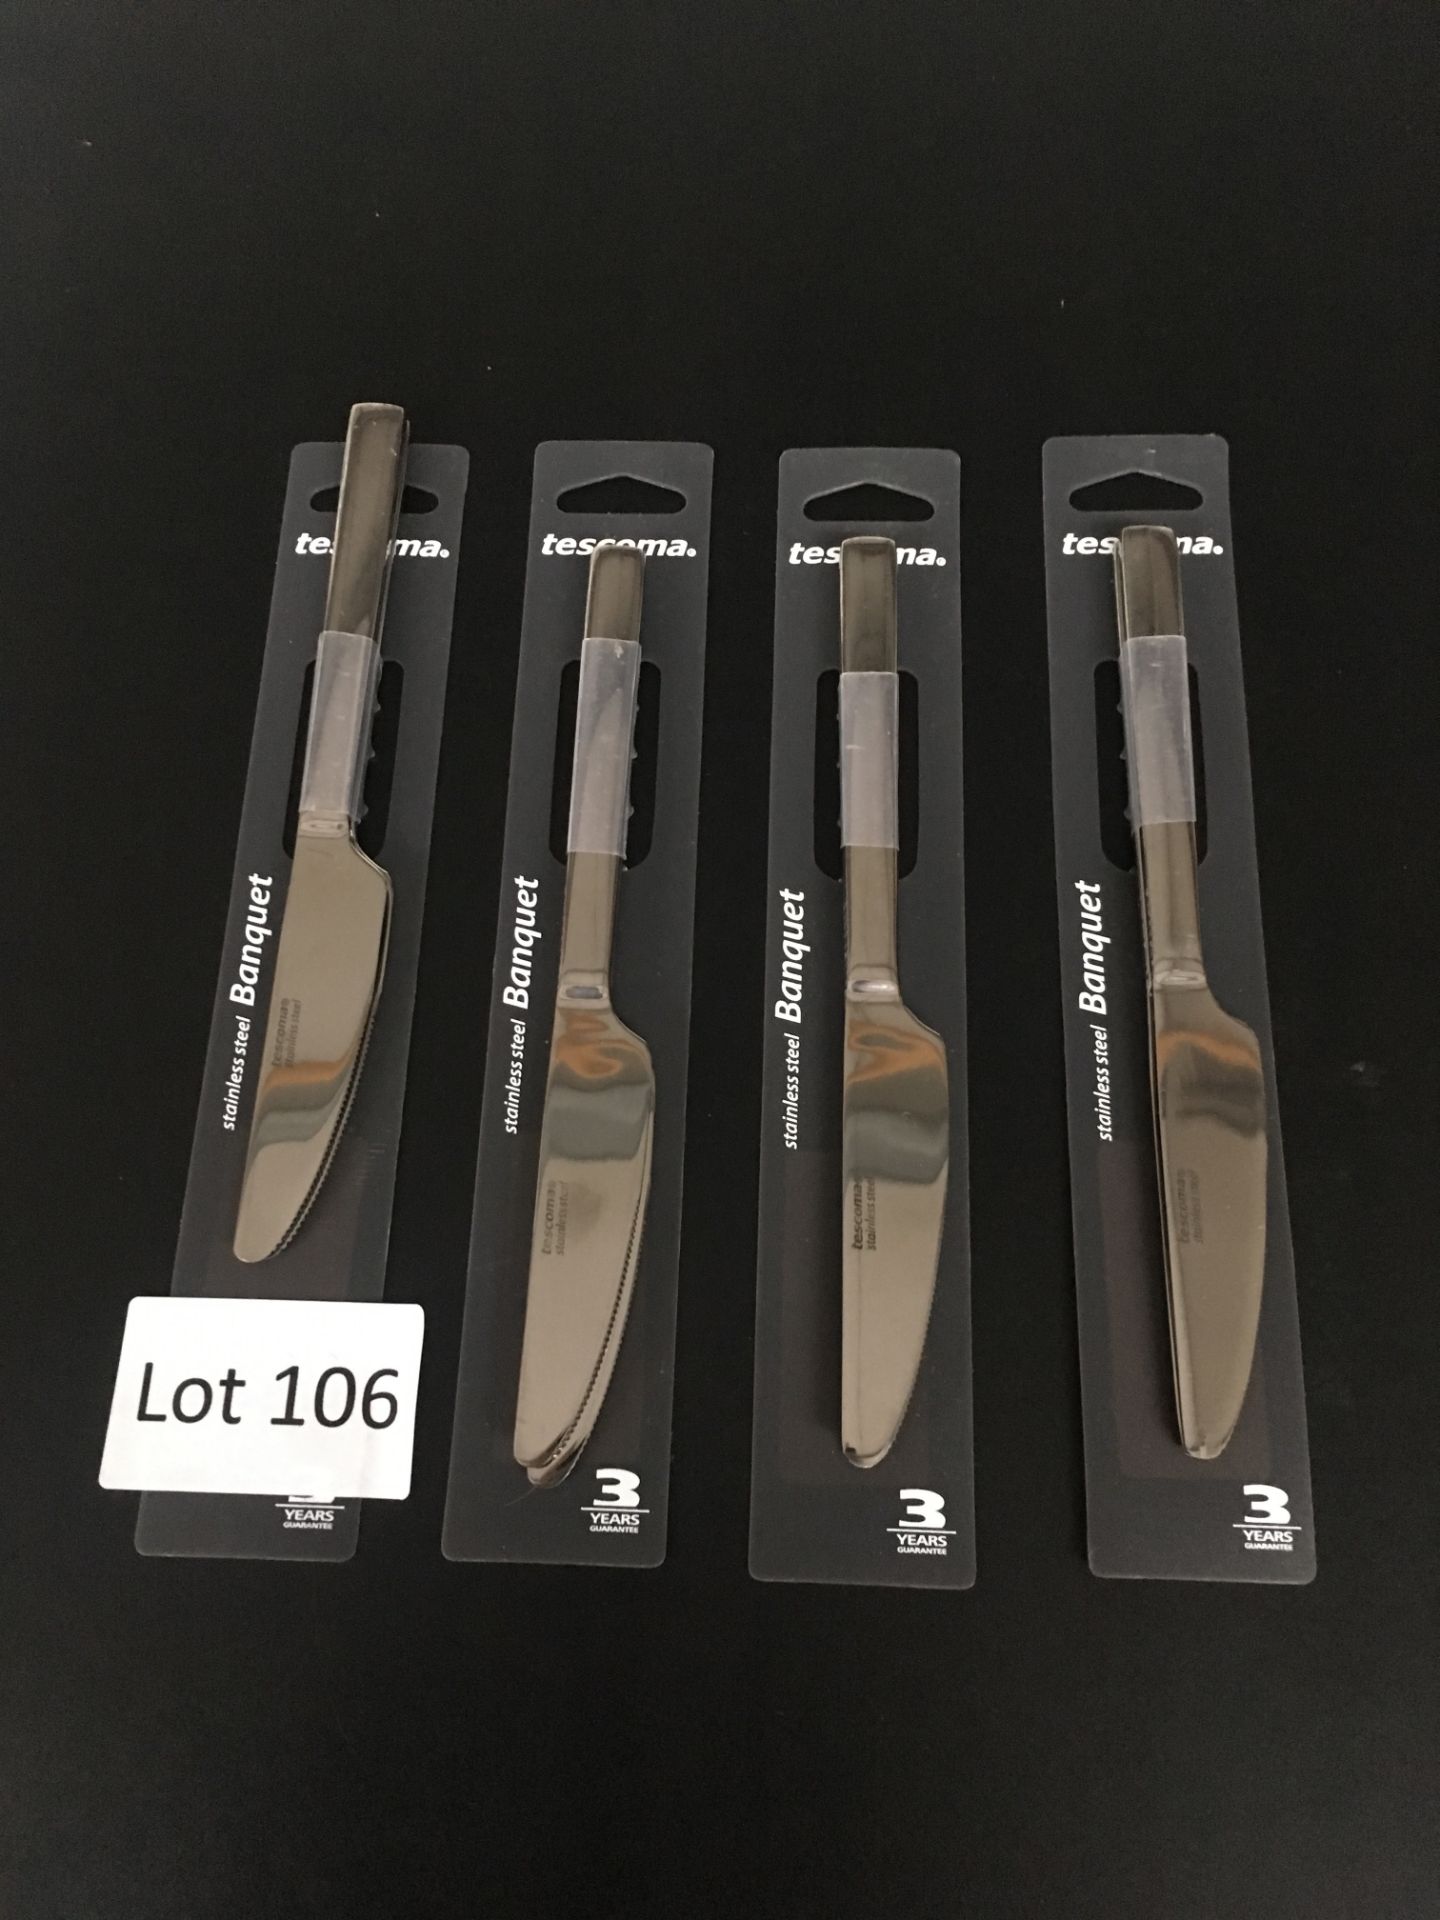 8 tescamo premium grade stainless steel banquet table knives. New.